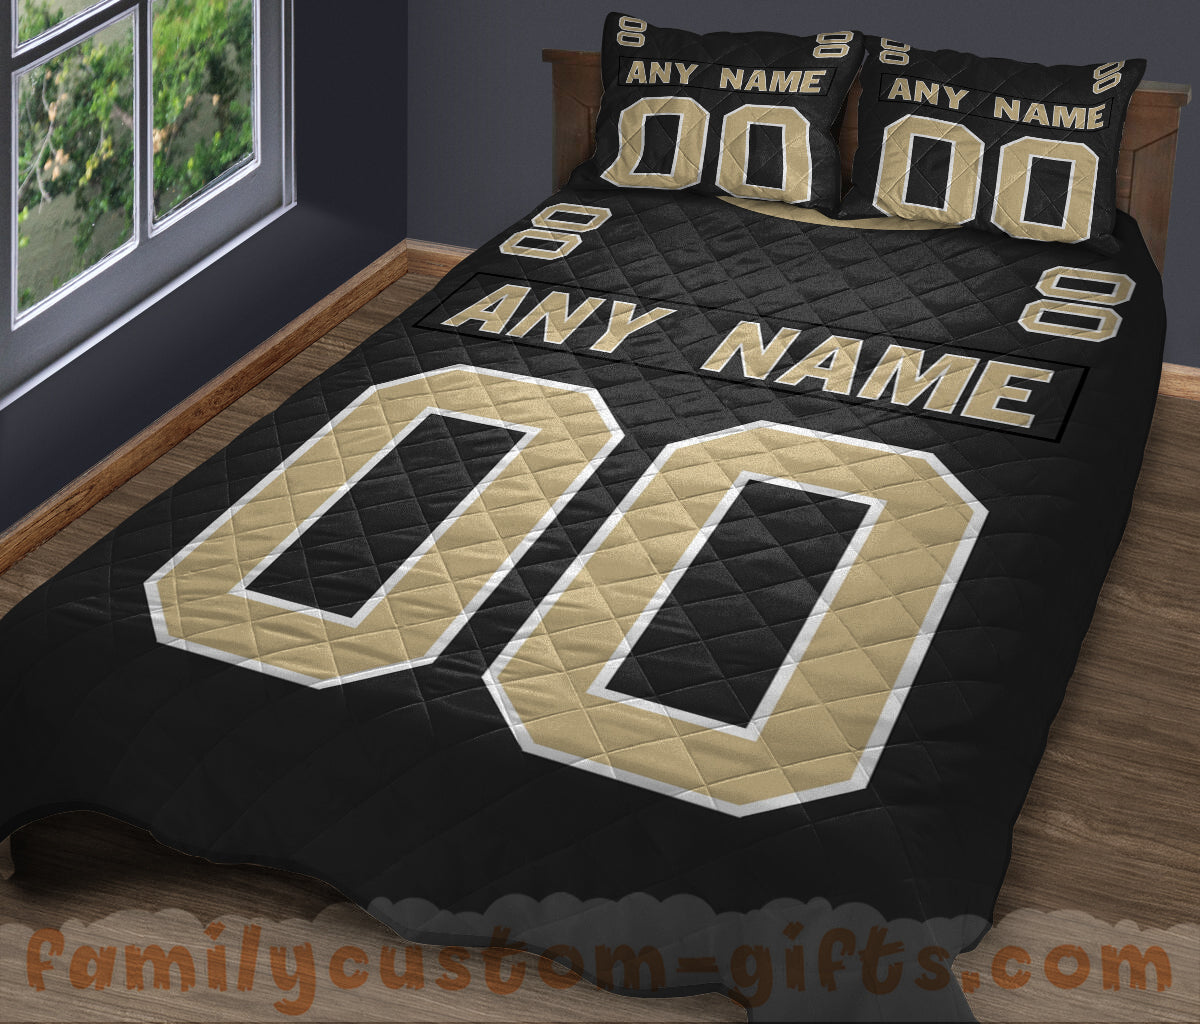 Custom Quilt Sets New Orleans Jersey Personalized Football Premium Quilt Bedding for Men Women